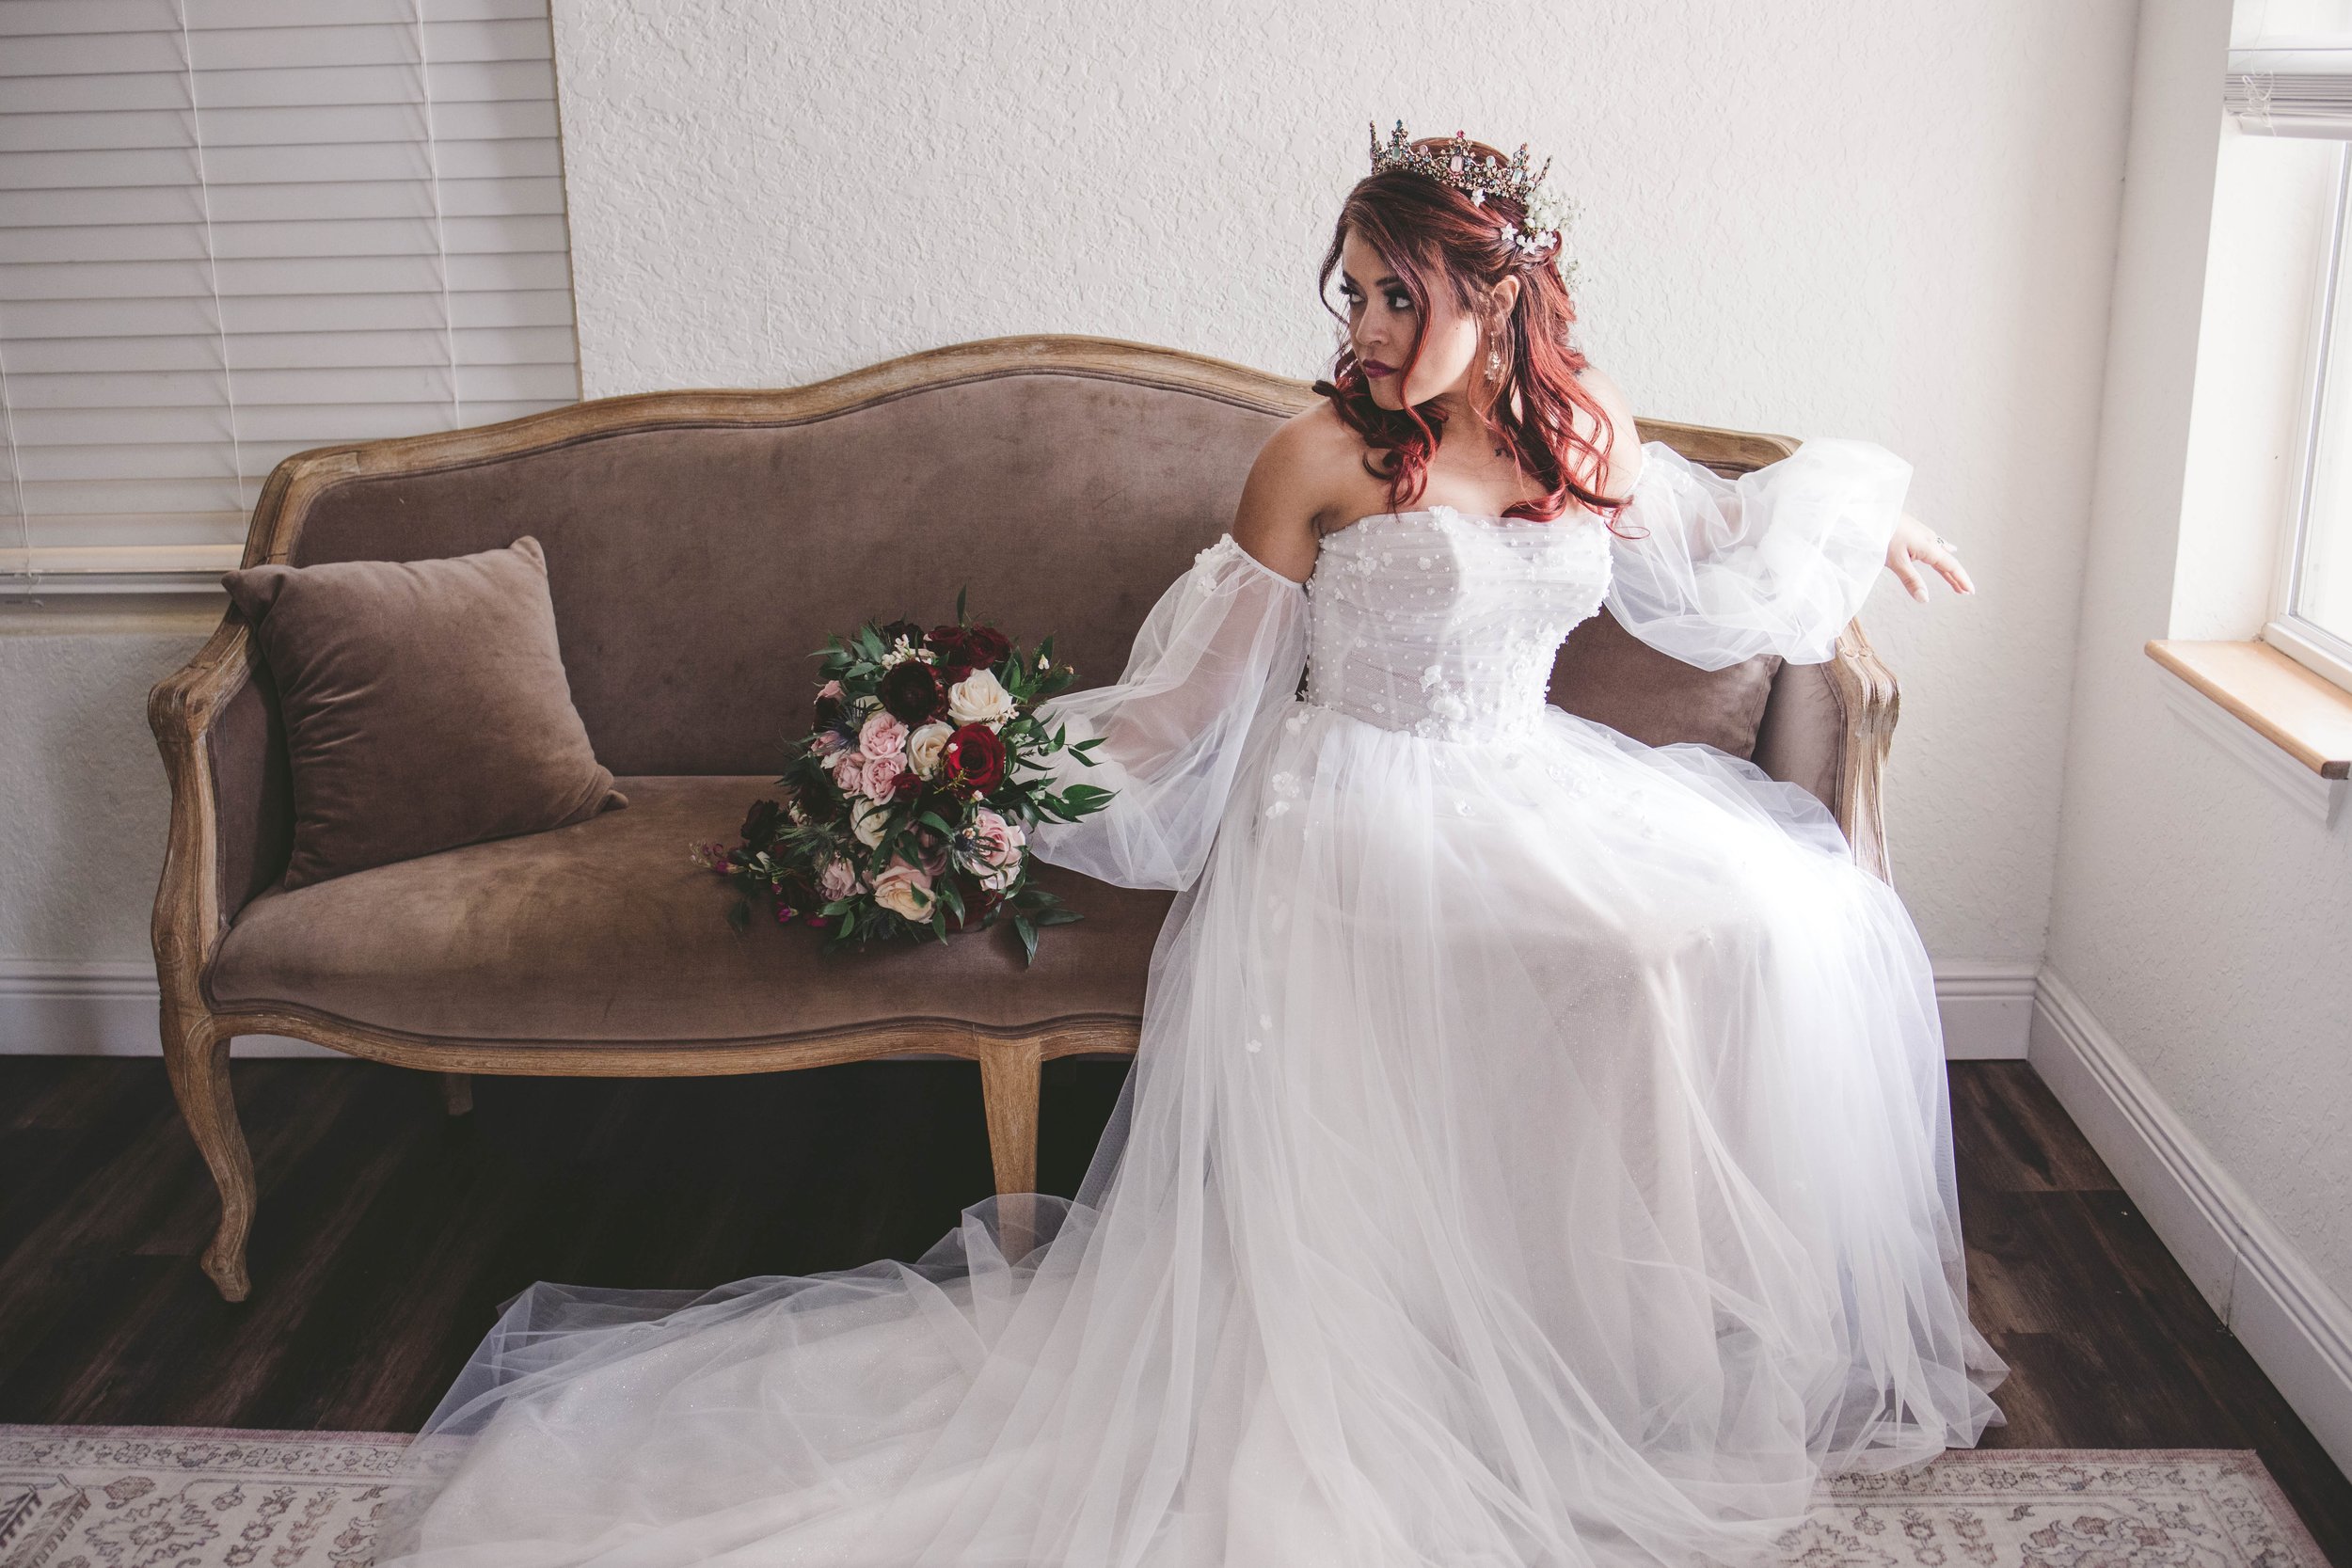 Bridal Portraits at The Sterling Event Venue in Minneola, FL